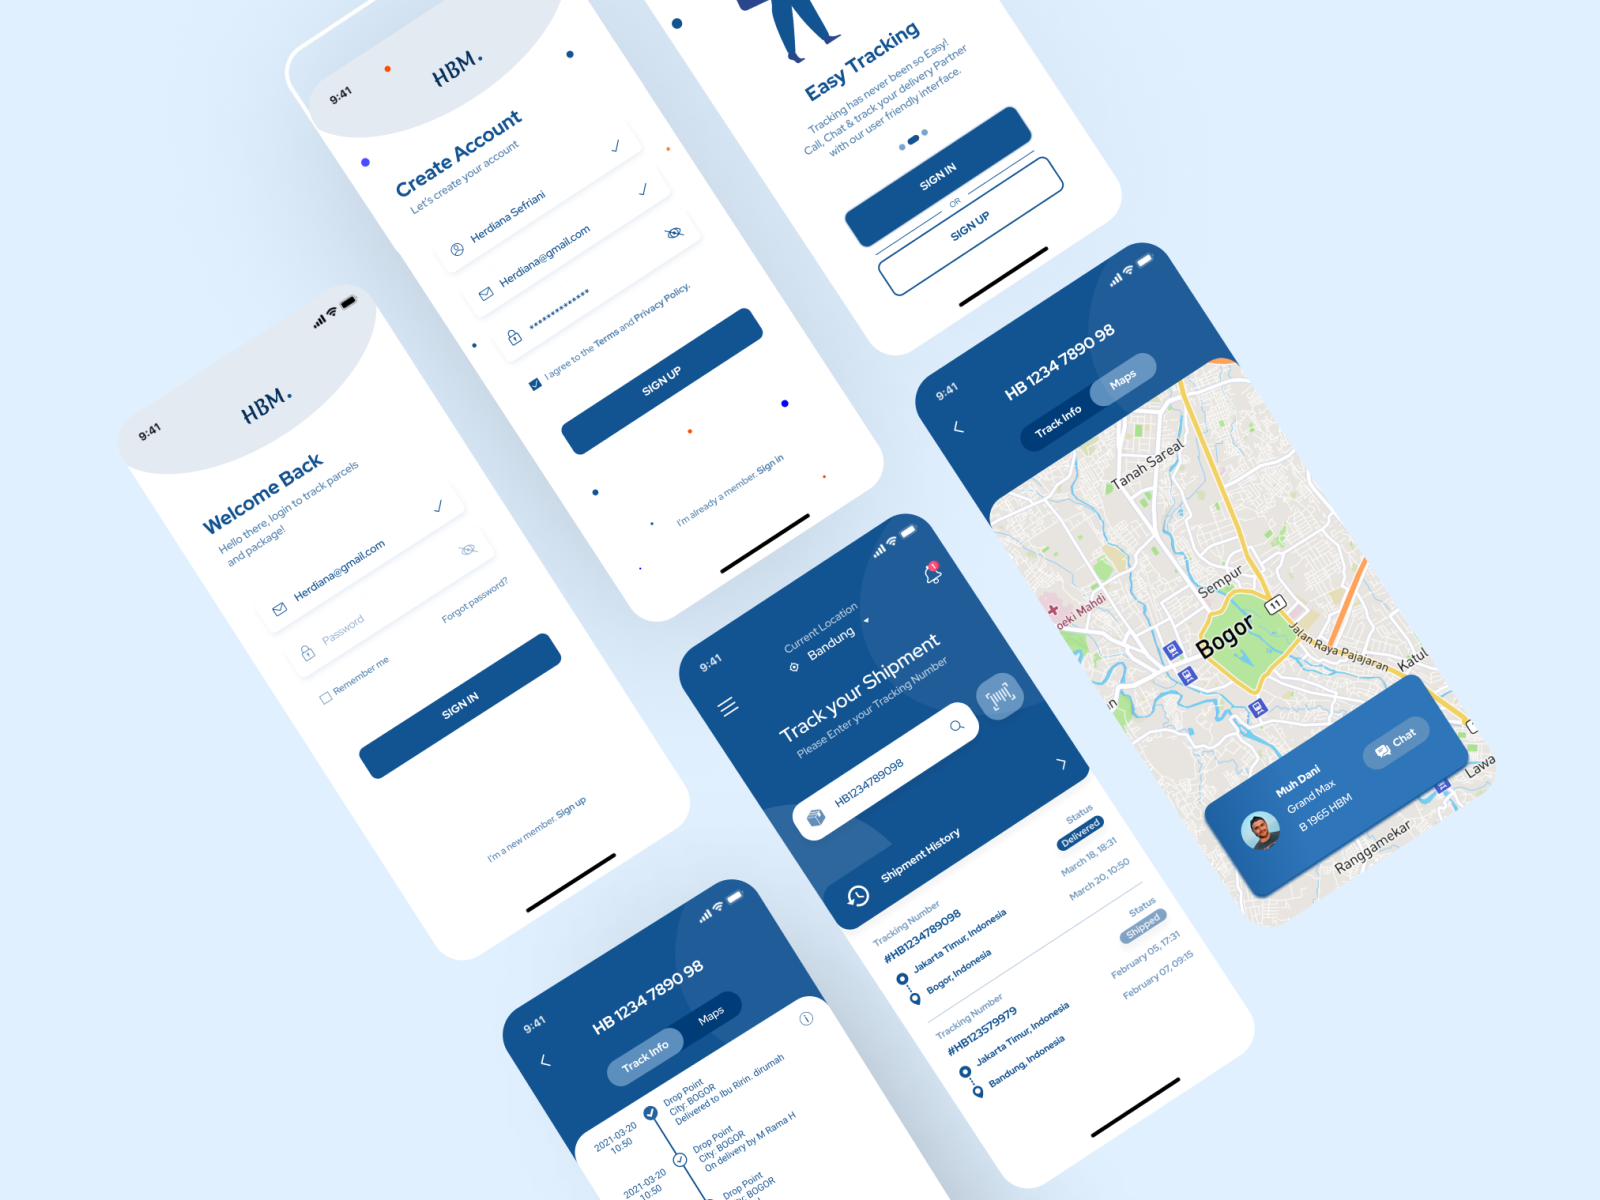 TRACKING APP by Herdiana Sefriani on Dribbble